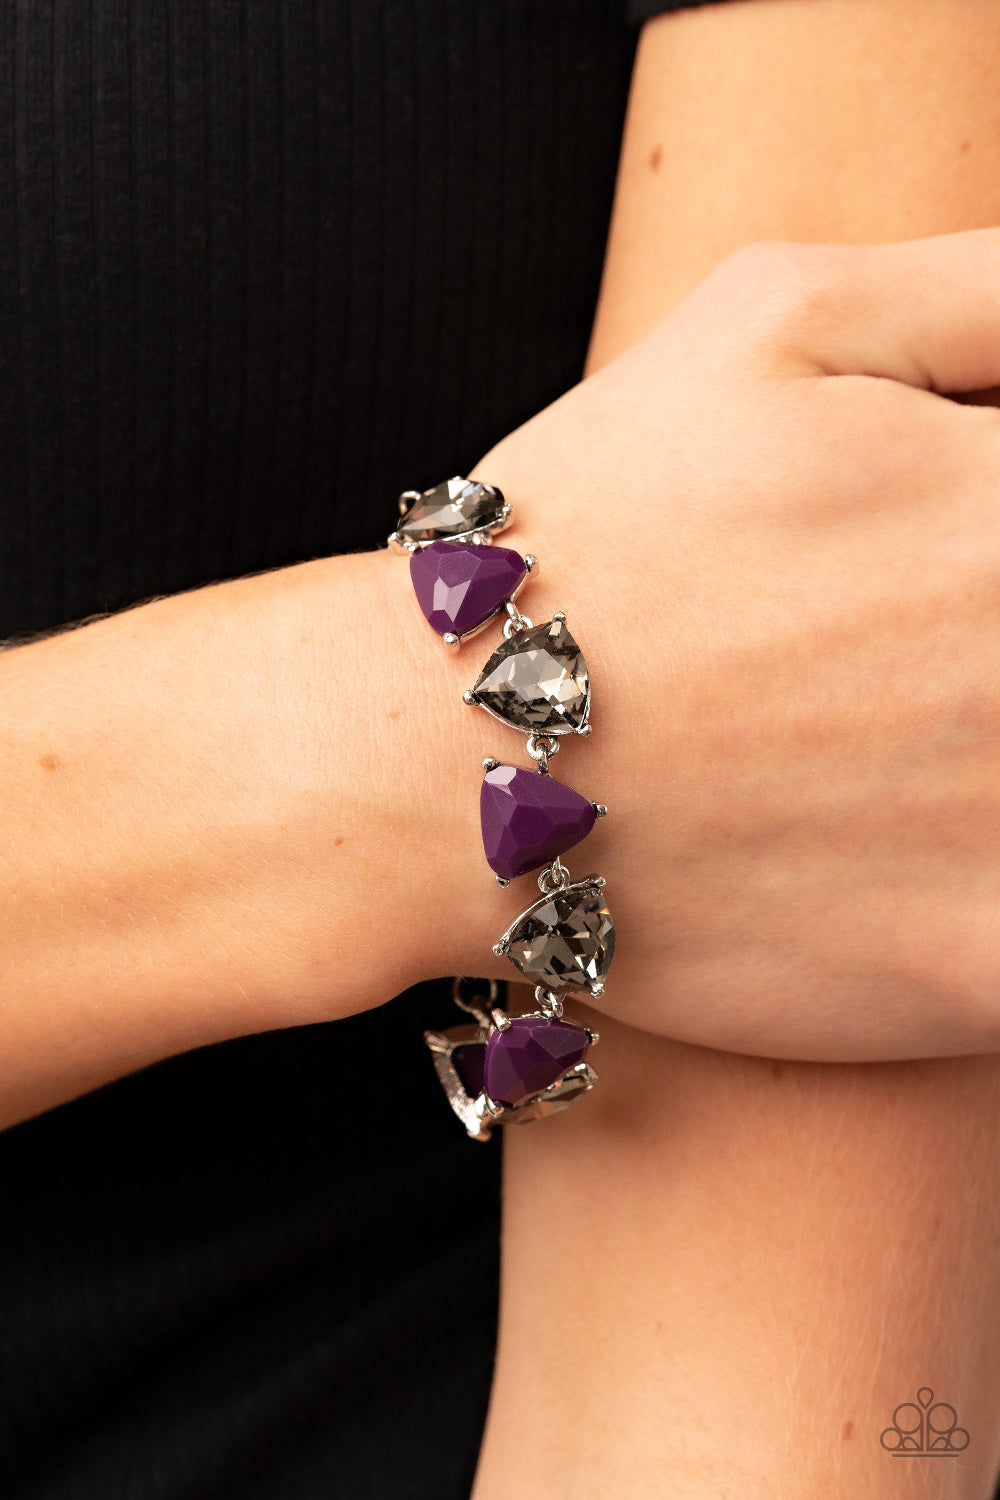 Pumped Up Prisms - Purple Bracelet - Paparazzi Accessories - Triangular cut plum beads and smoky gems alternate around the wrist, creating a prismatic pop of color. Features an adjustable clasp closure. Sold as one individual bracelet.